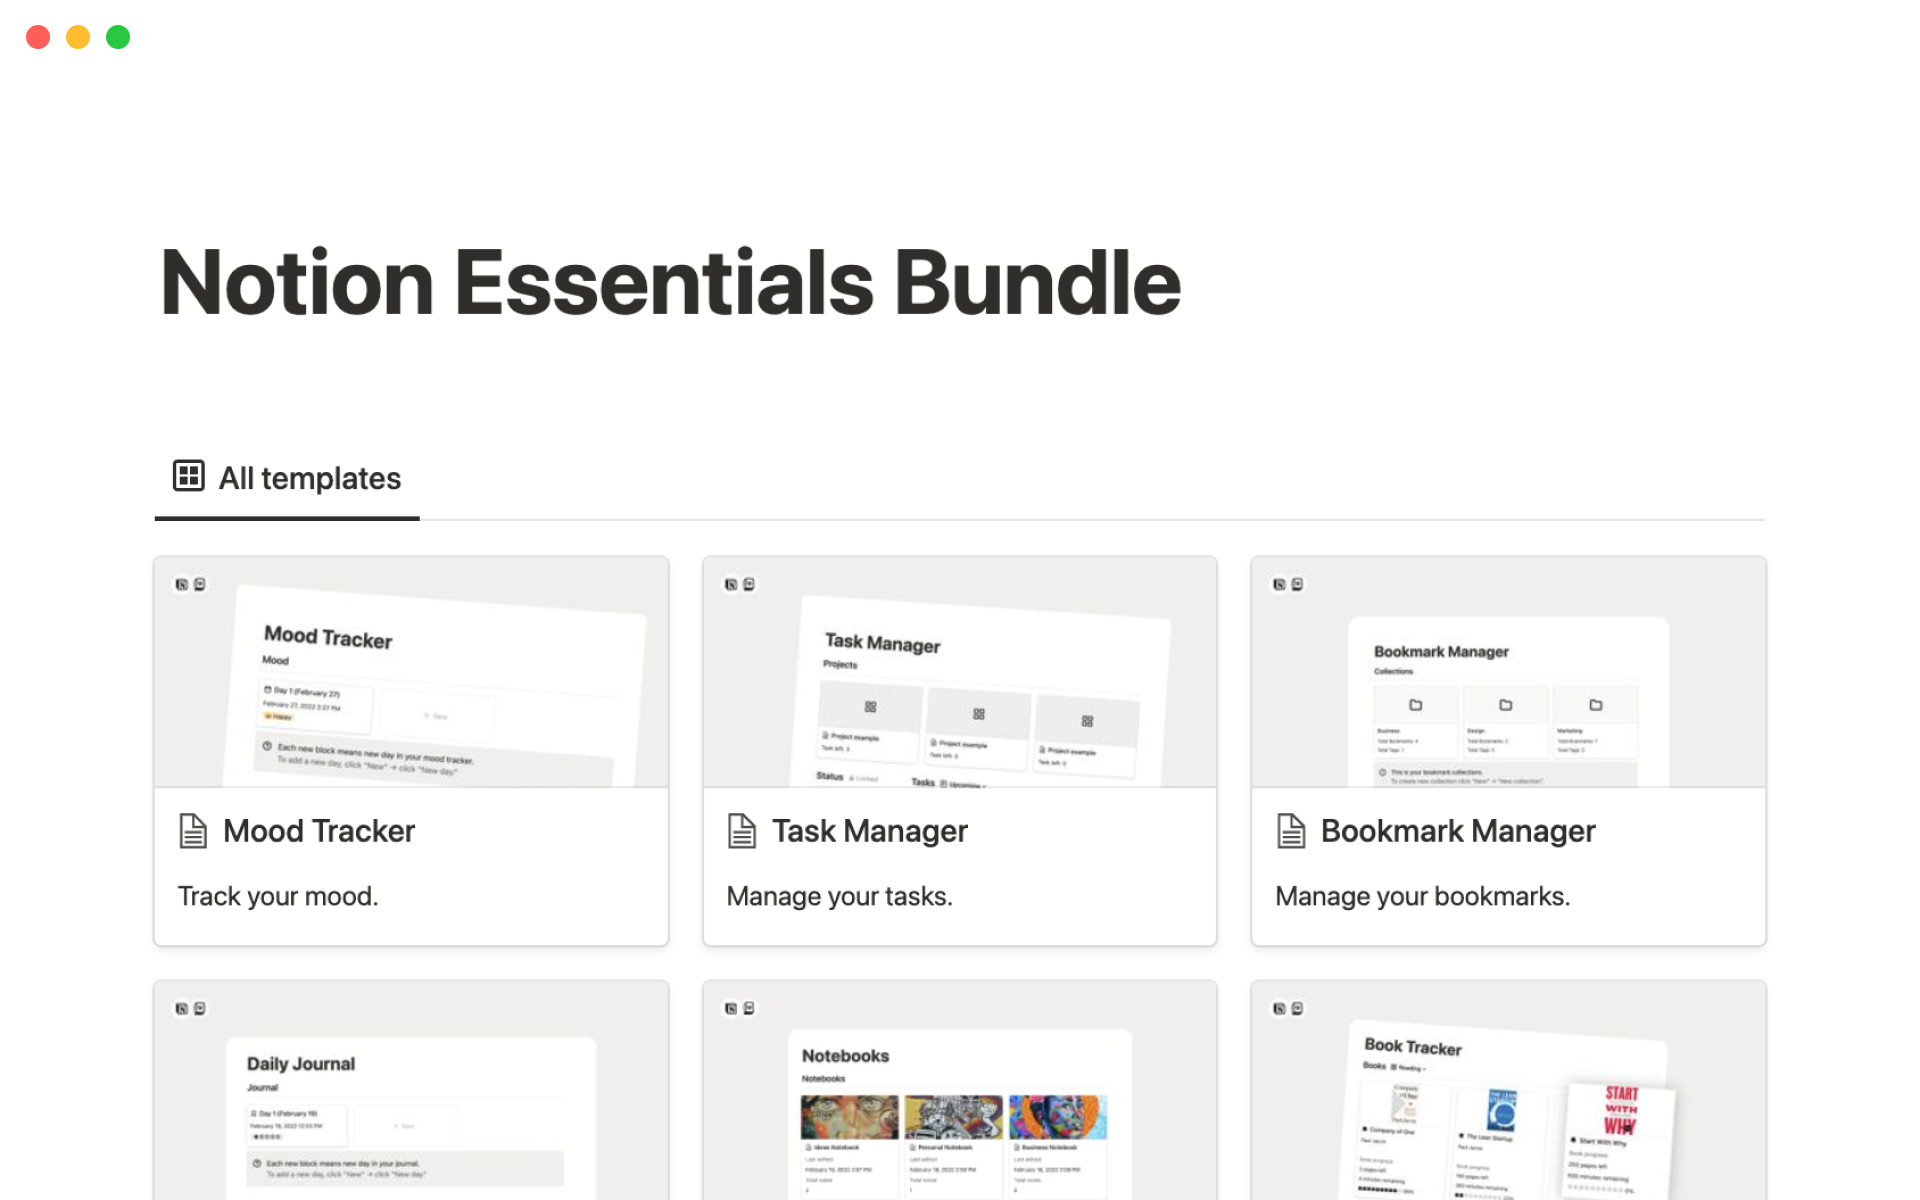 A bundle of essential templates including more than 10 premium-crafted items for personal and work purposes.